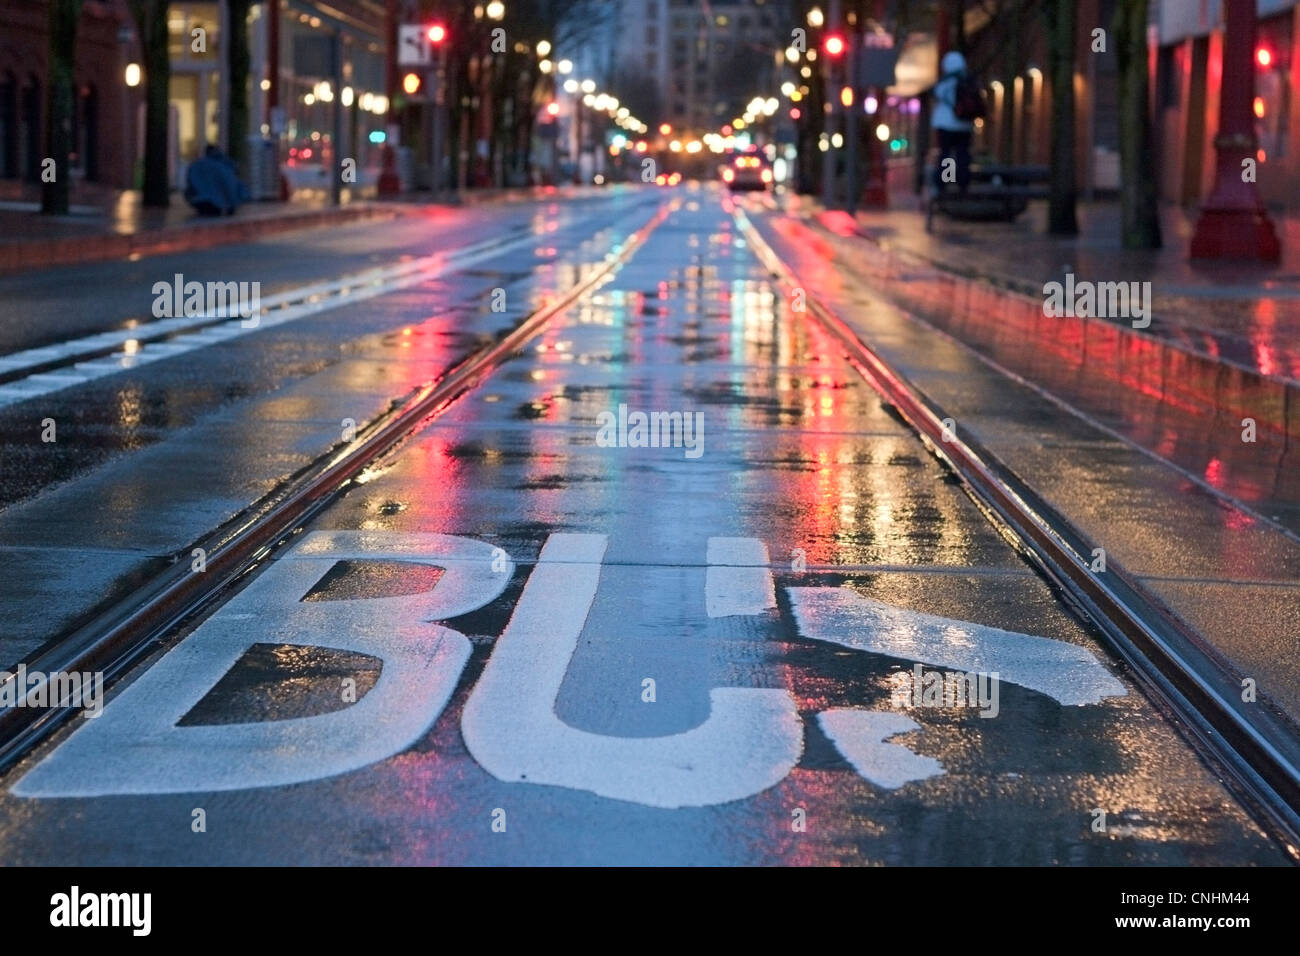 Downtown Portland, Oregon bus lane during a dreary night. Stock Photo